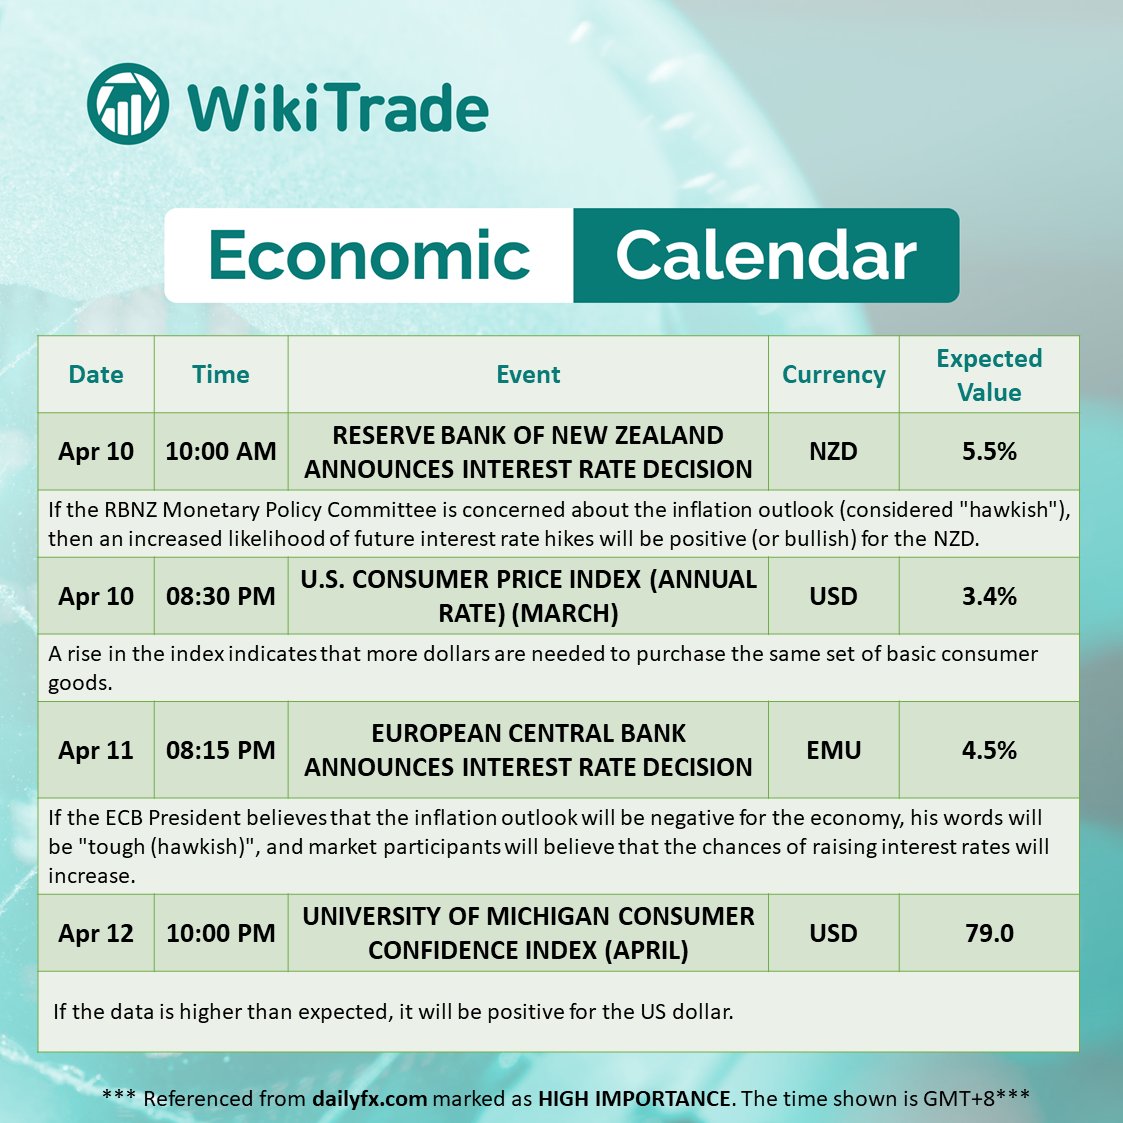 📅 New Weekly Economic Calendar is here! 📅

📈Each week, we bring you the latest data on key economic events, market movements, and policy updates. 

🔔Don't miss out on this valuable resource! Bookmark it, share it, and stay tuned for weekly updates. 

#economiccalendar…